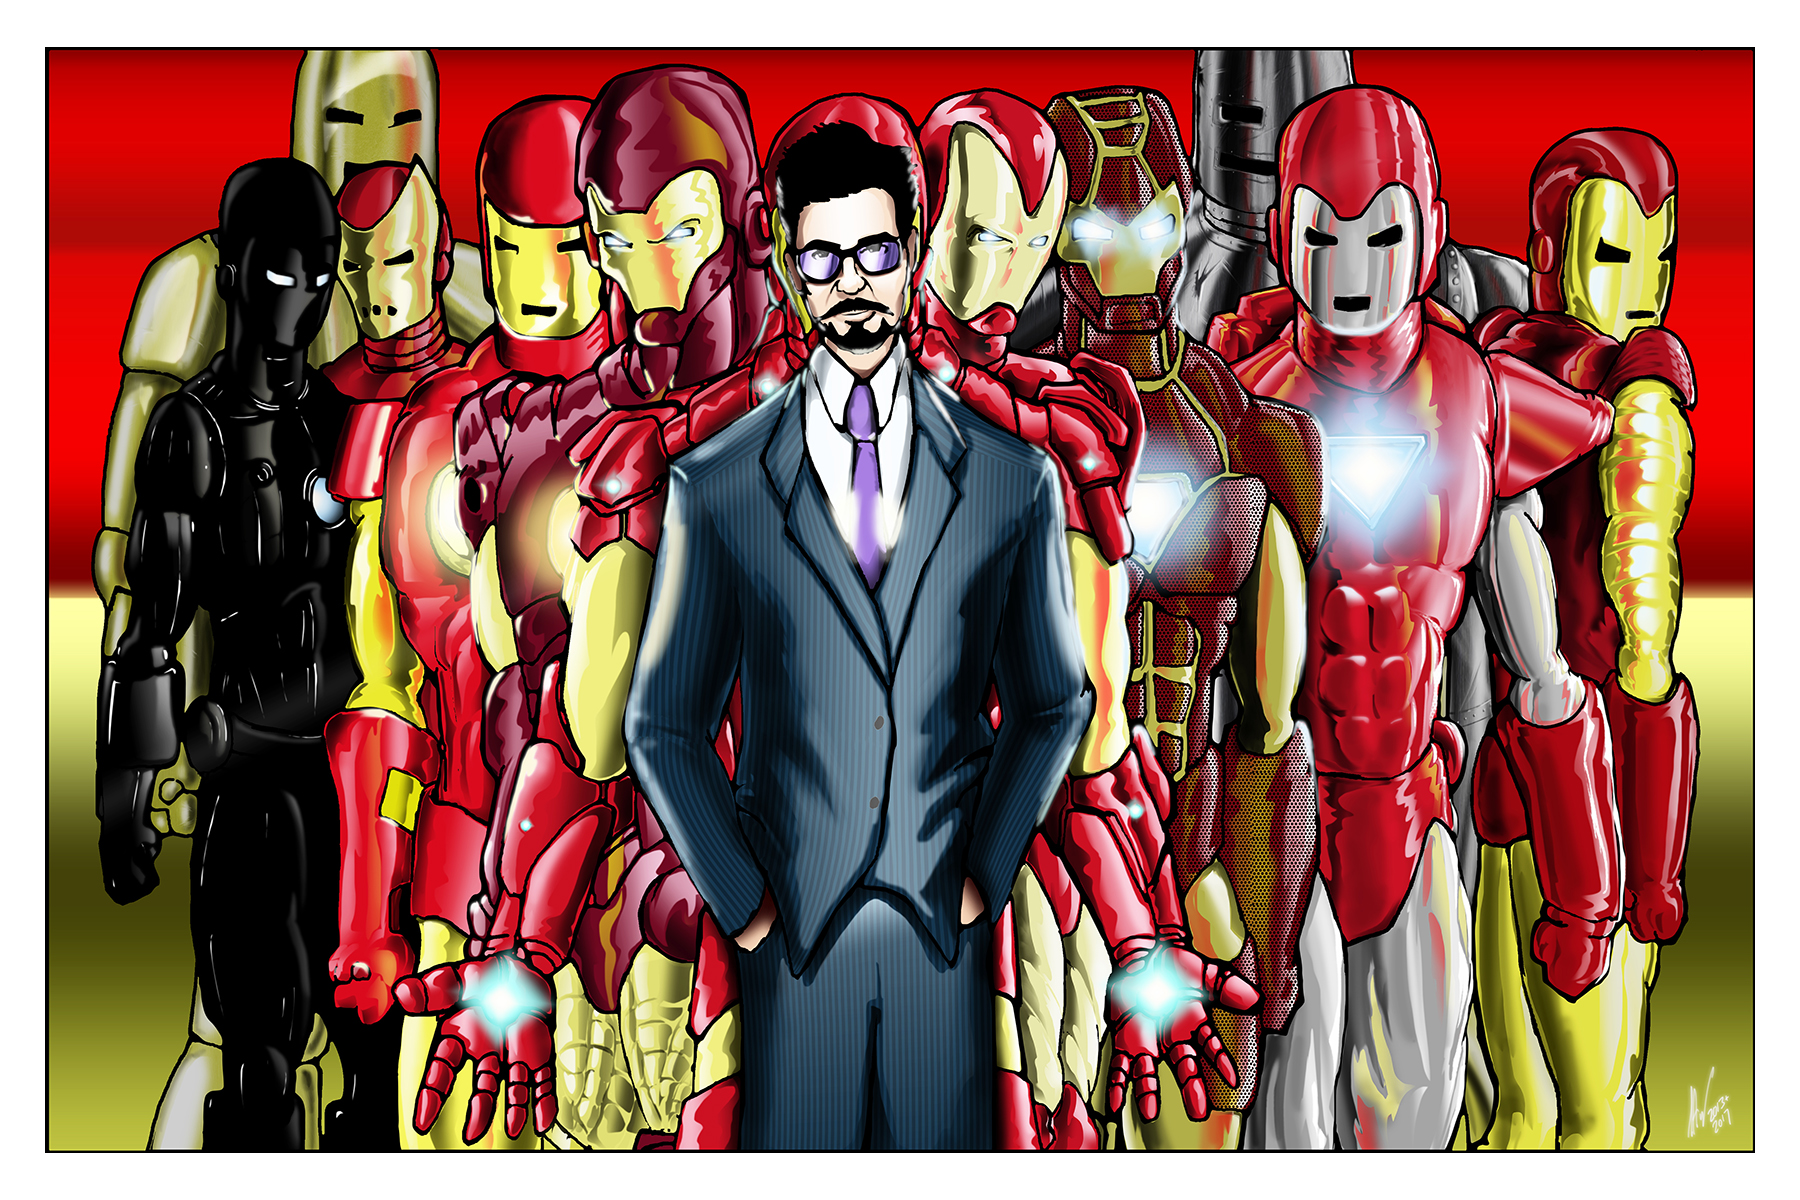 Iron Man-A Man and His Suits 11x17 copy.jpg